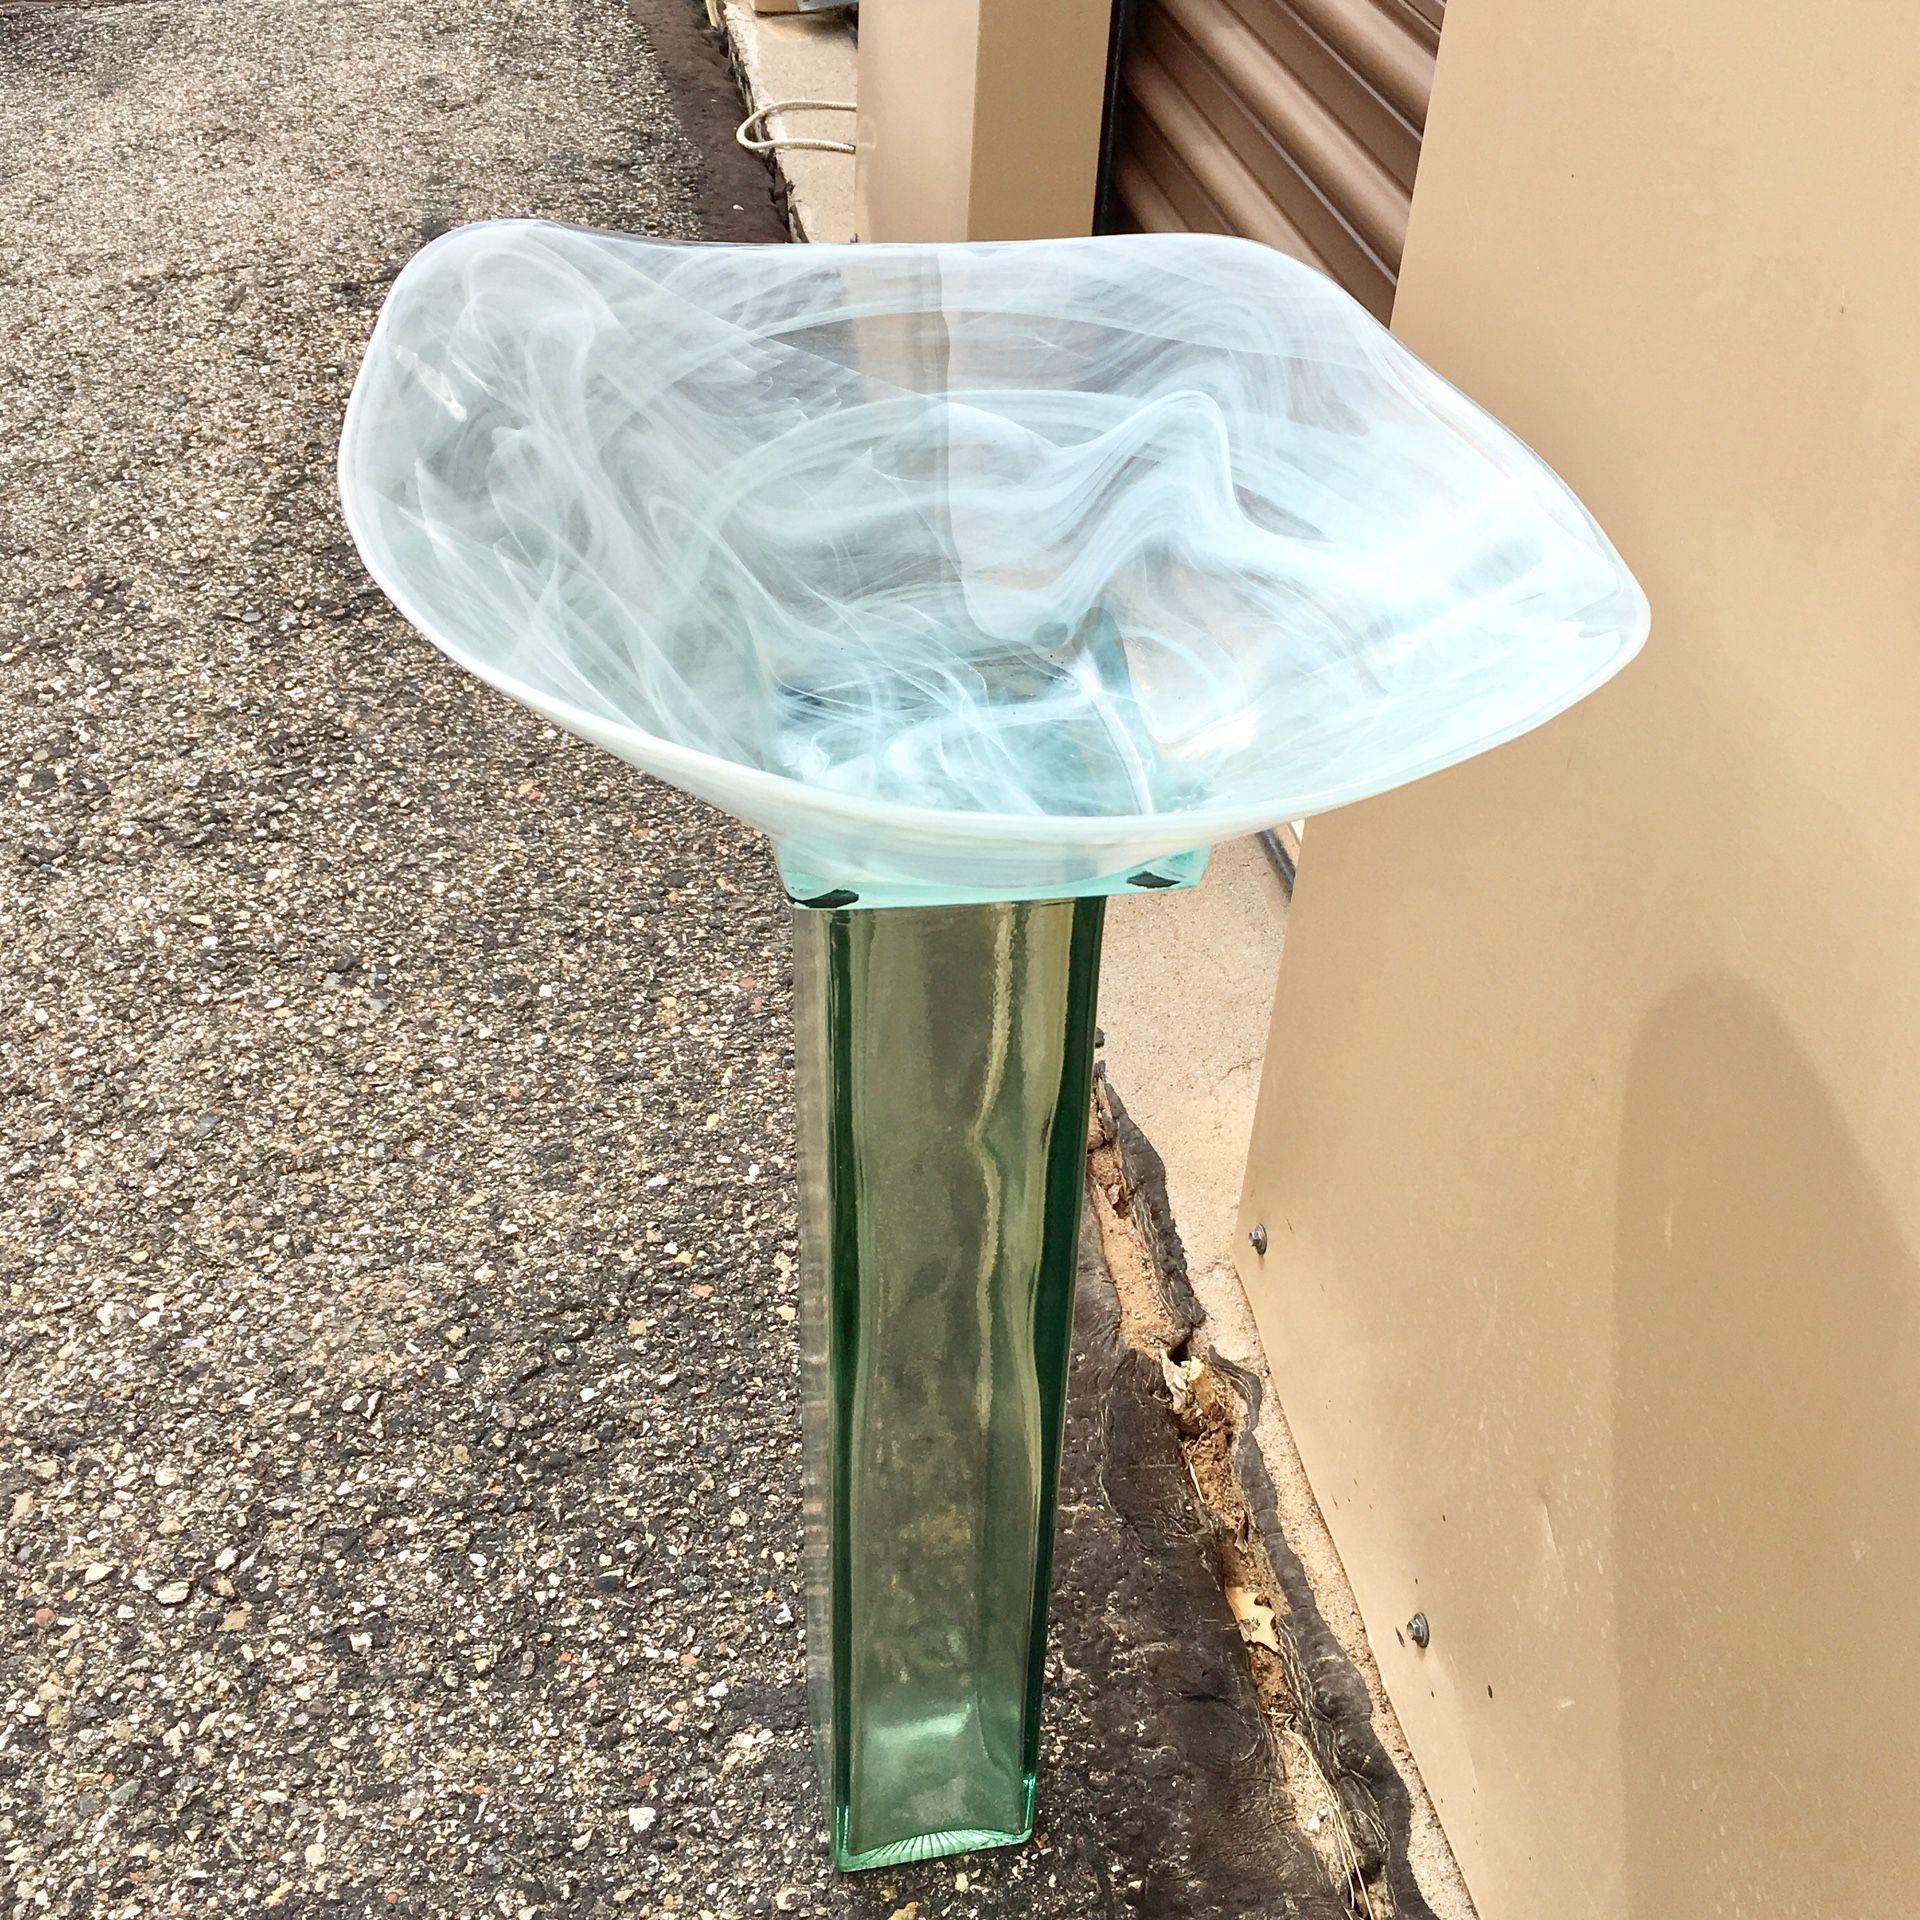 Bird Bath or Feeder for your garden - Glass Aqua Green Bowl with green glass 2.5' tall stand!